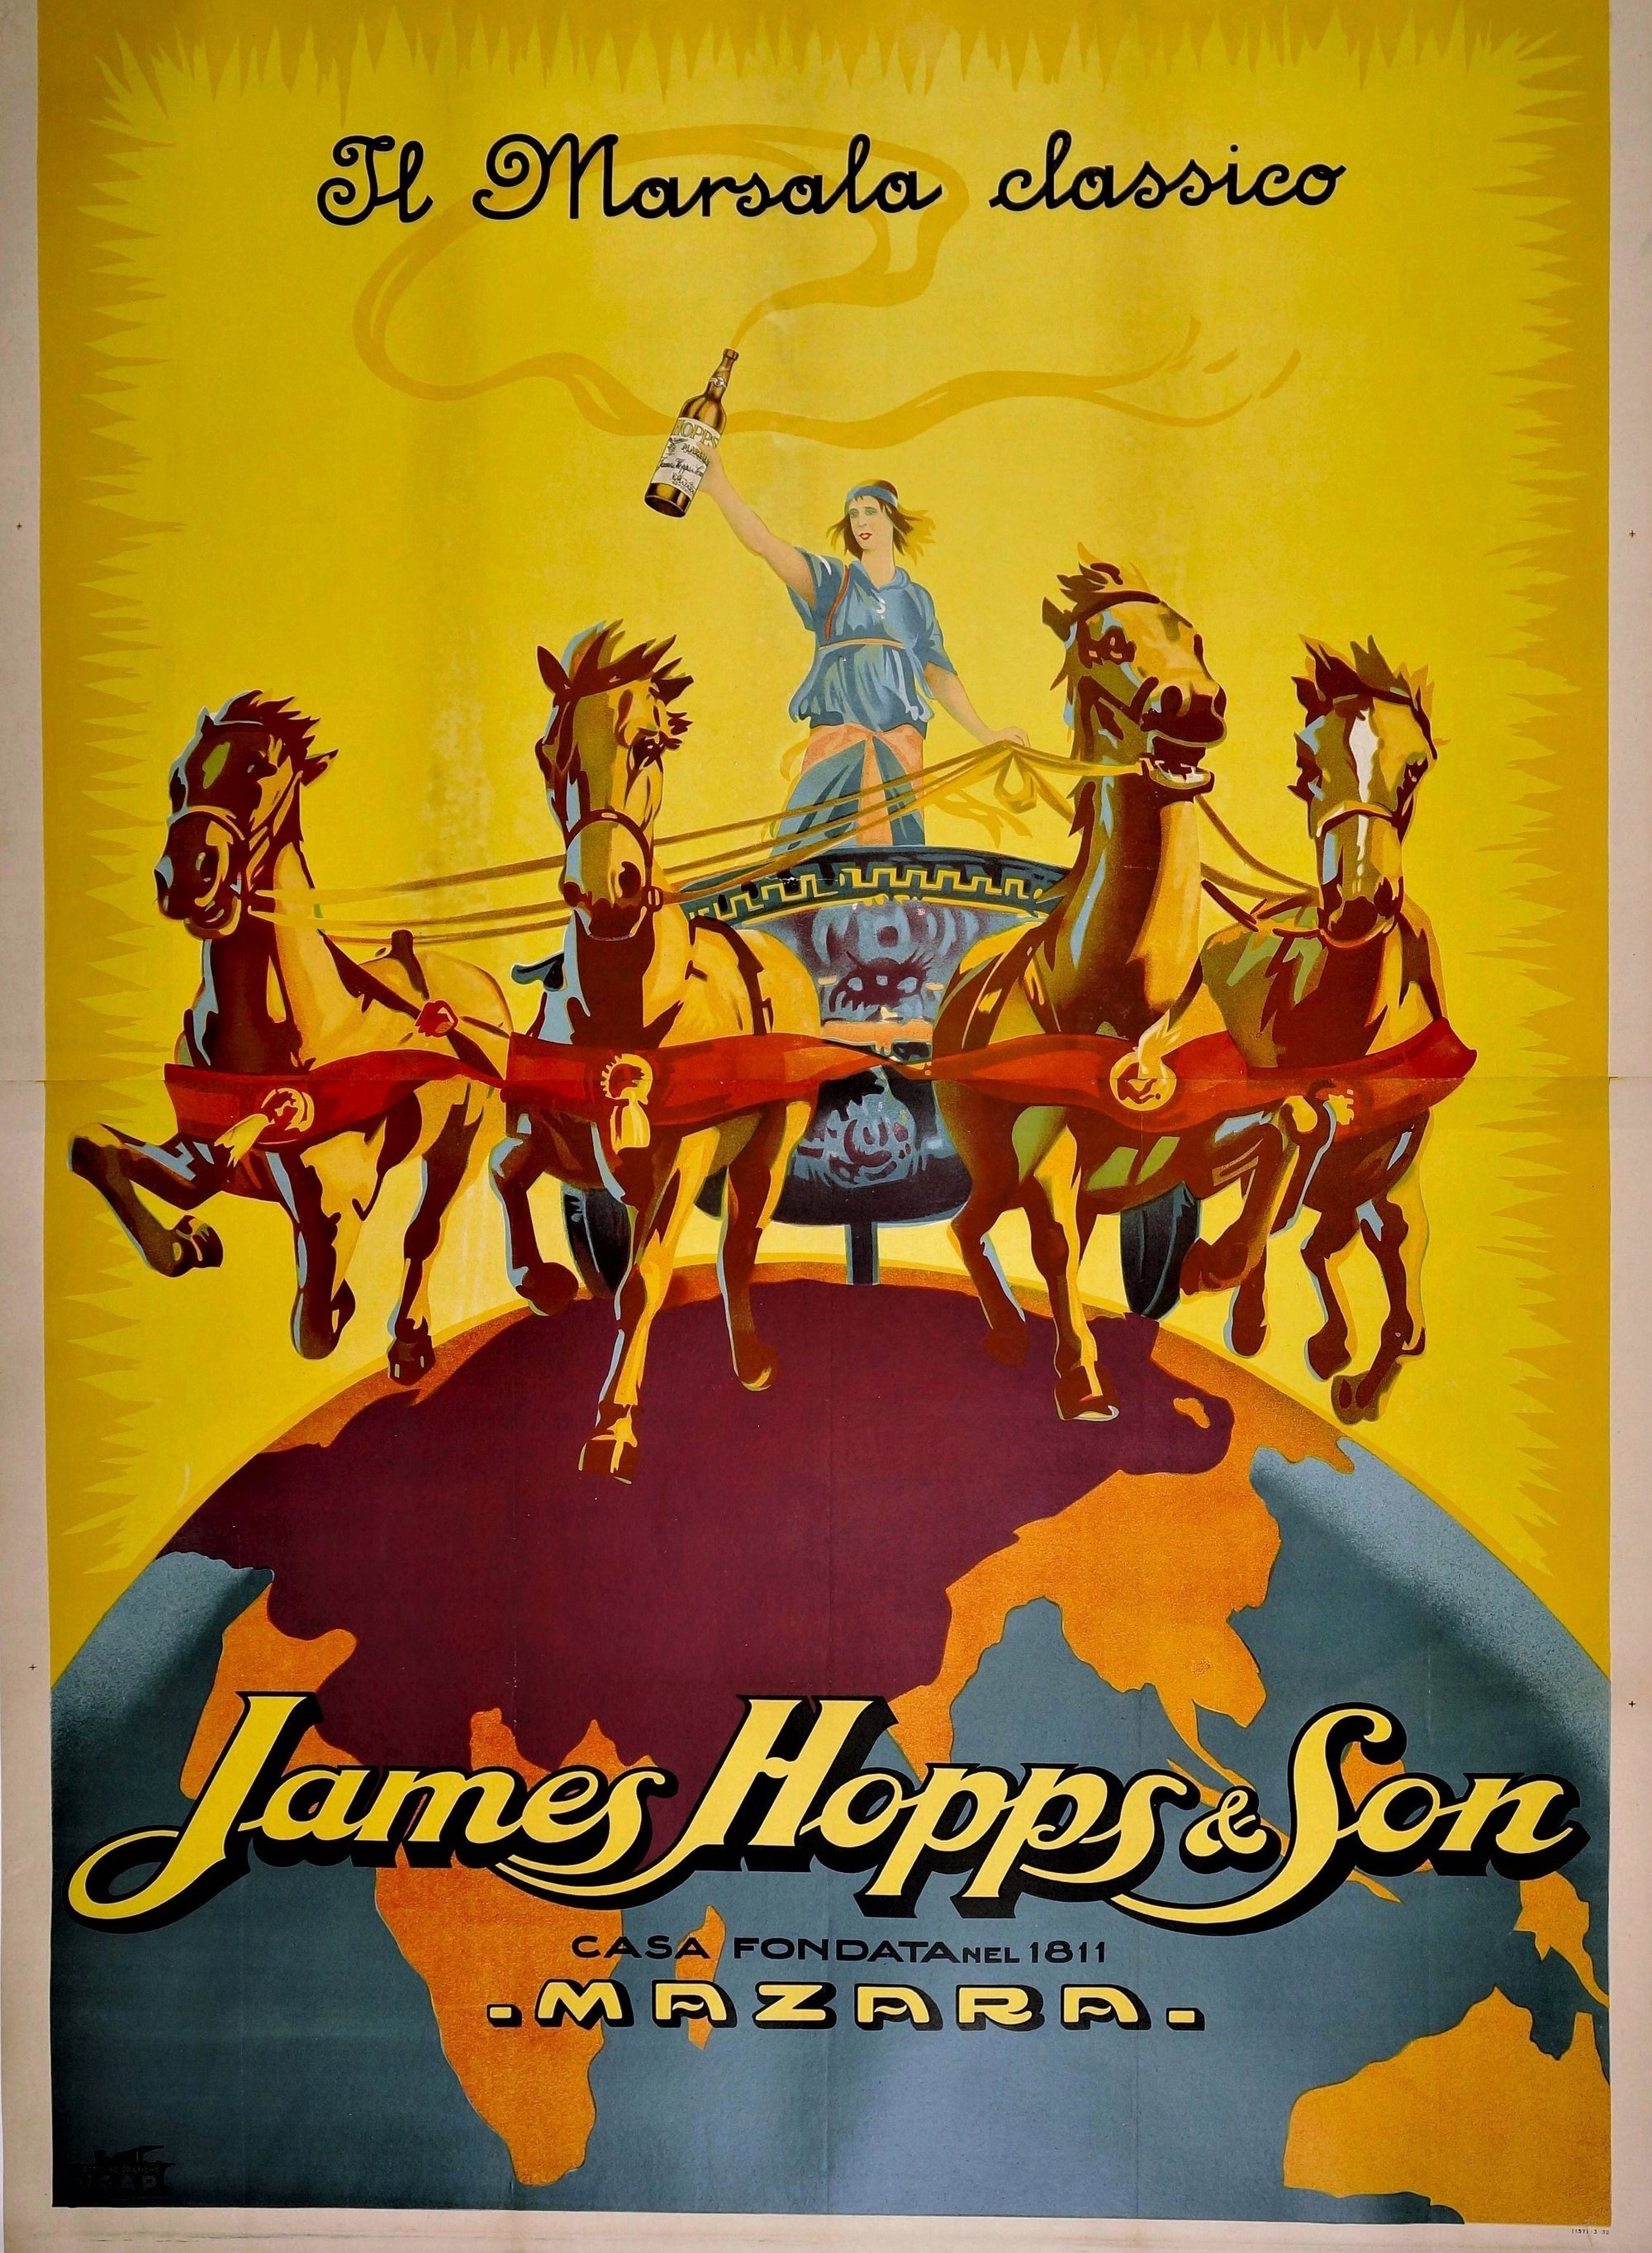 James Hopps & Sons - Authentic Vintage Poster